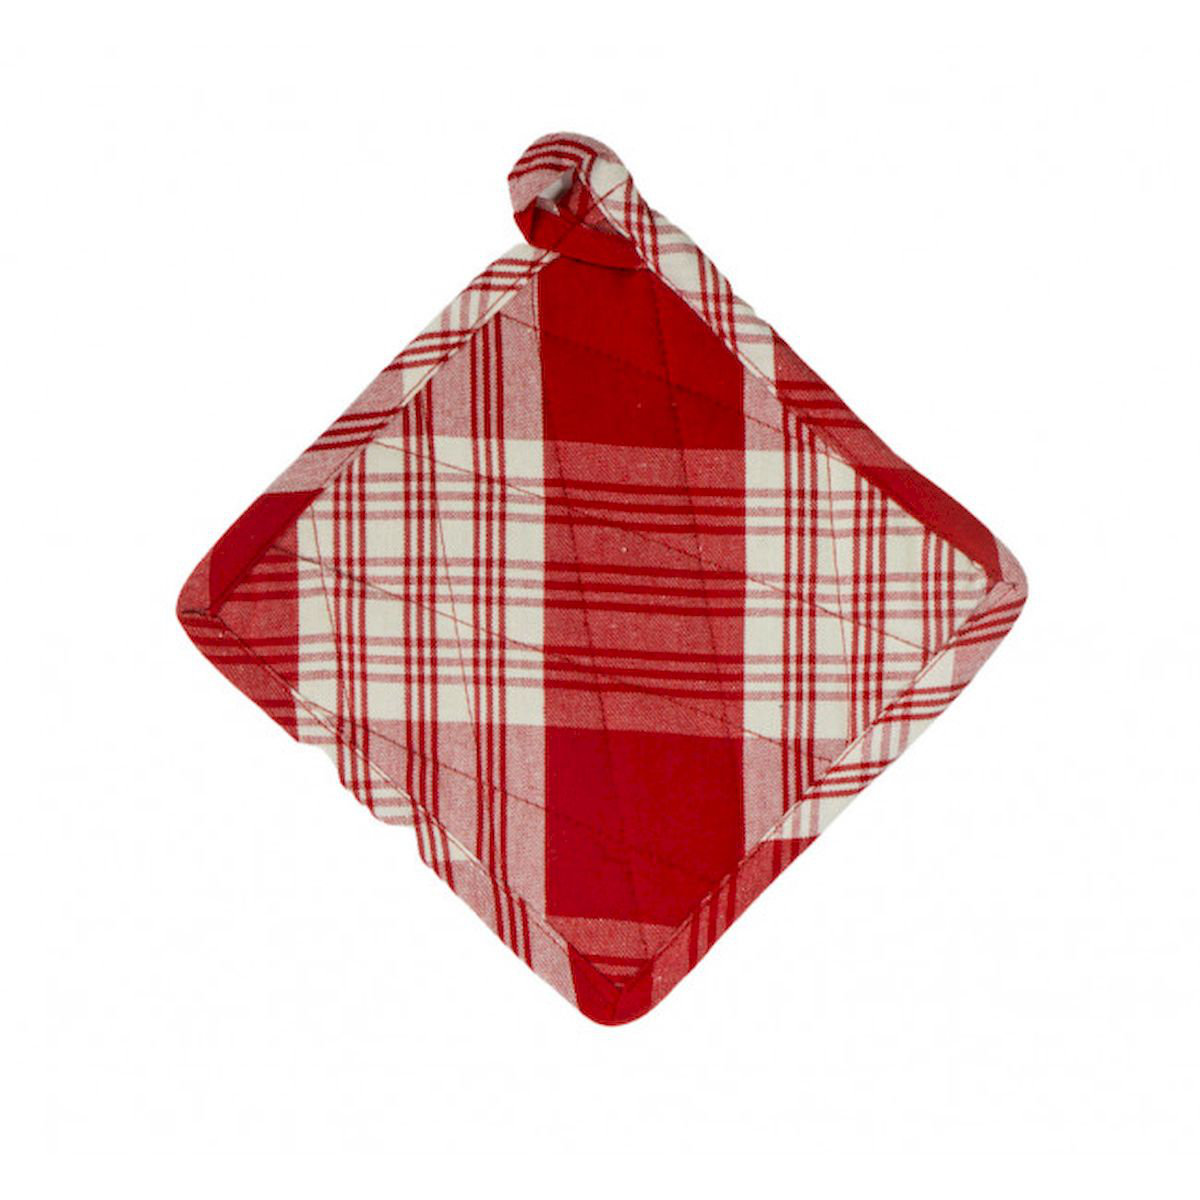 Red Plaid 100% Cotton Mini Oven Mitts With Silicone Palm (Set of 2)